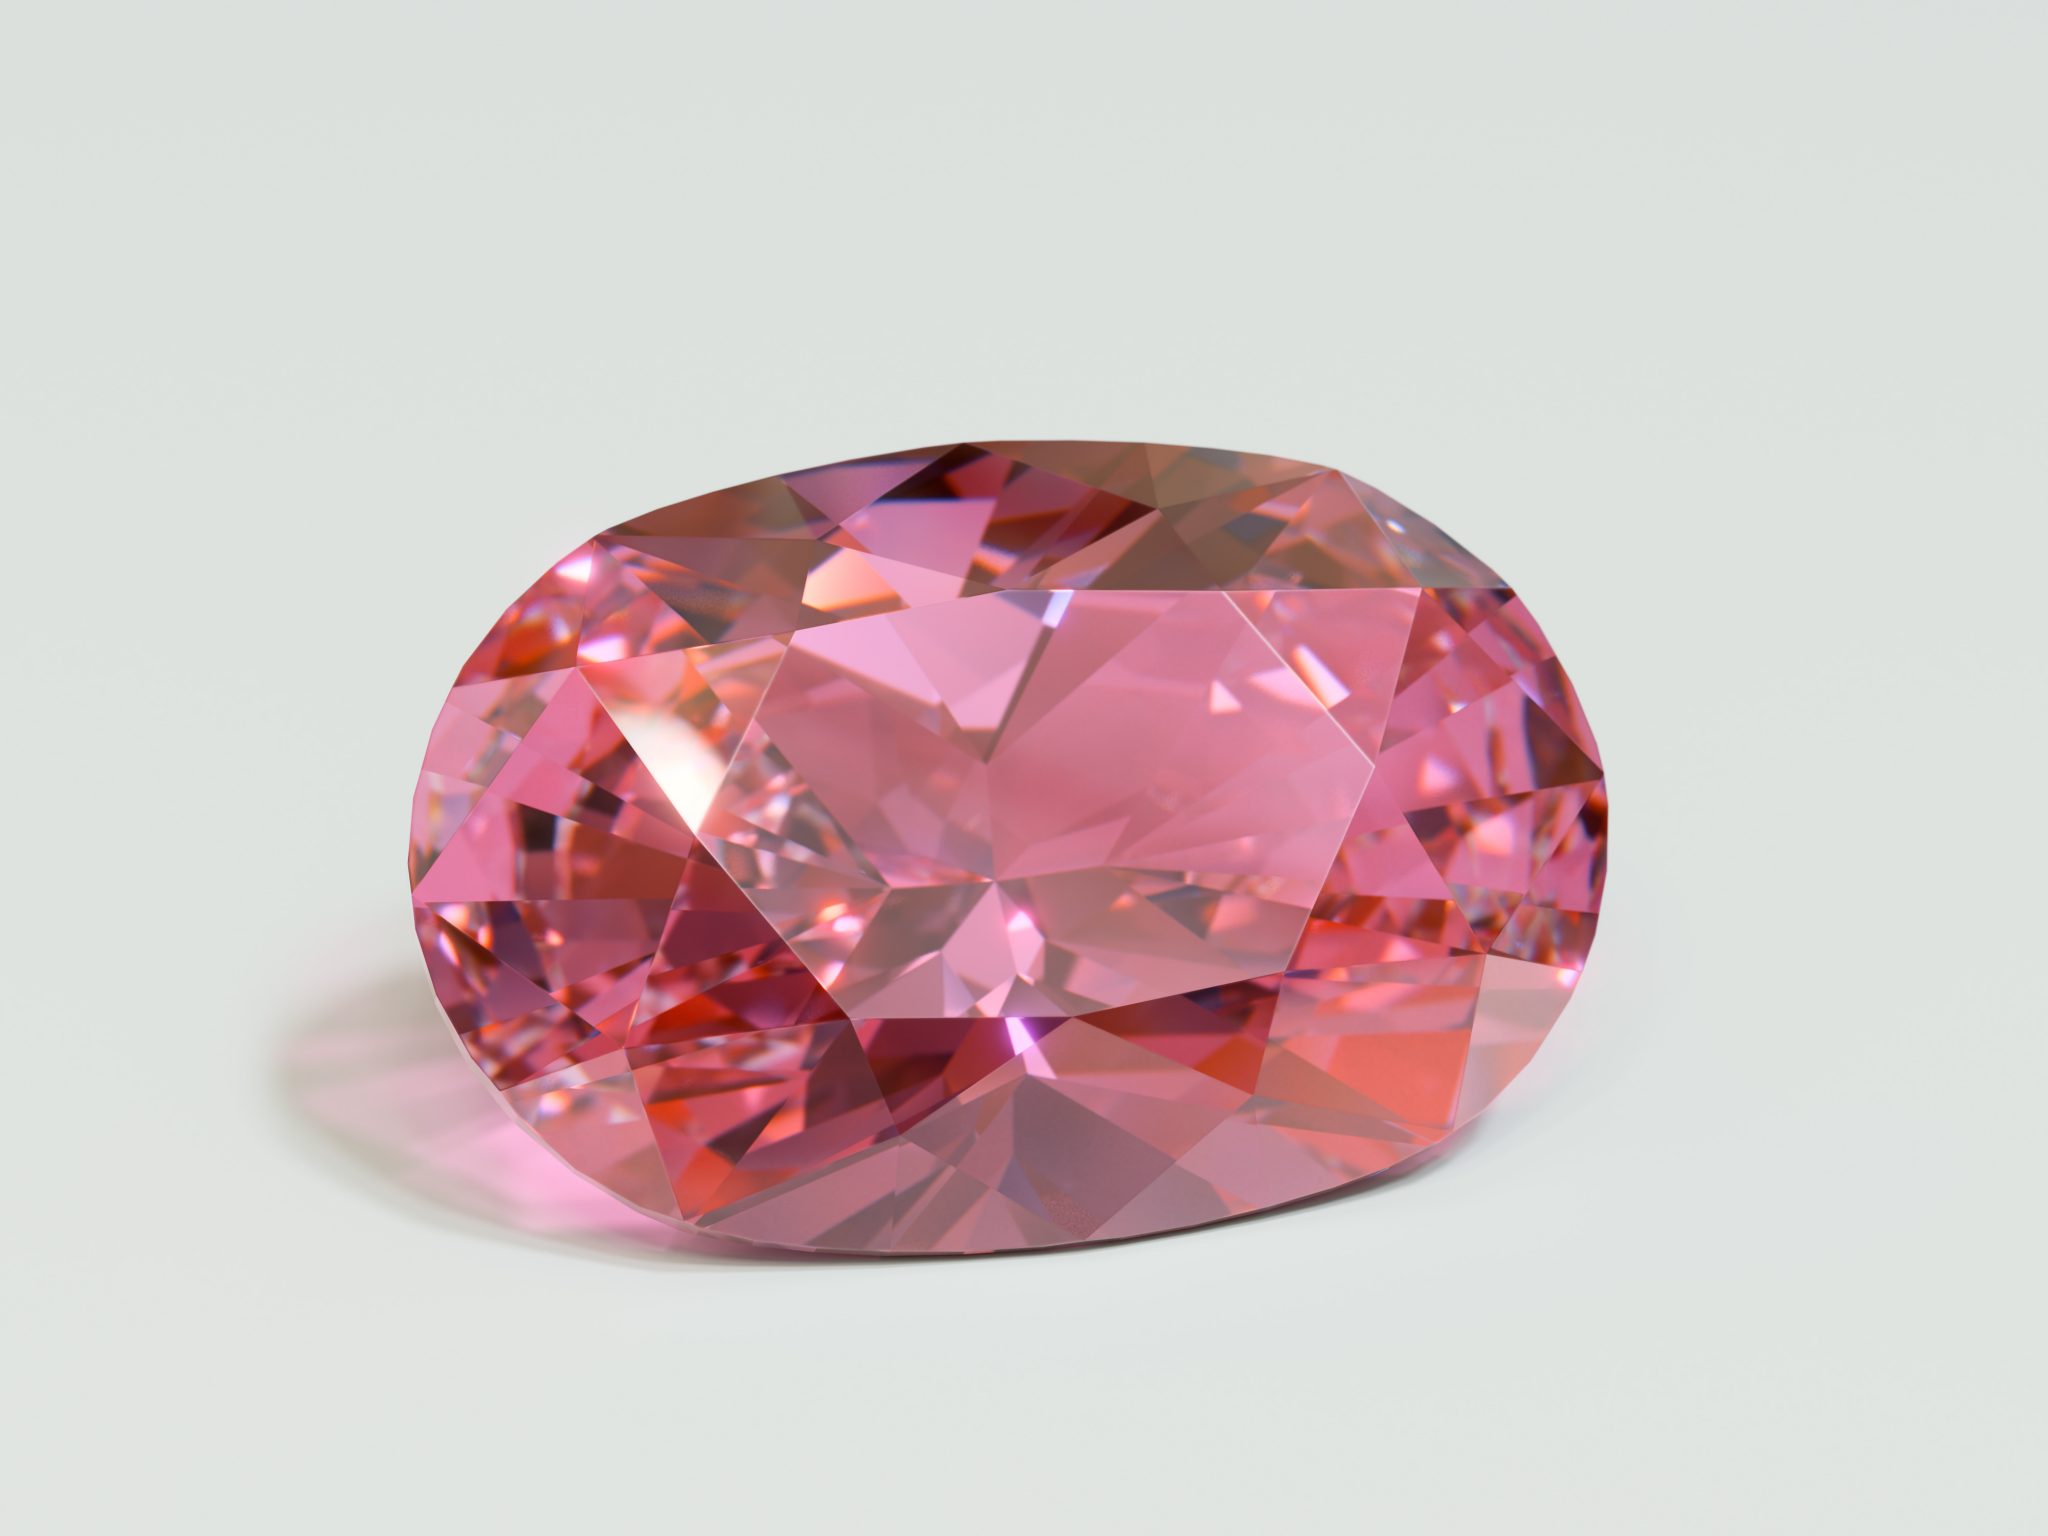 padparadscha sapphire meaning